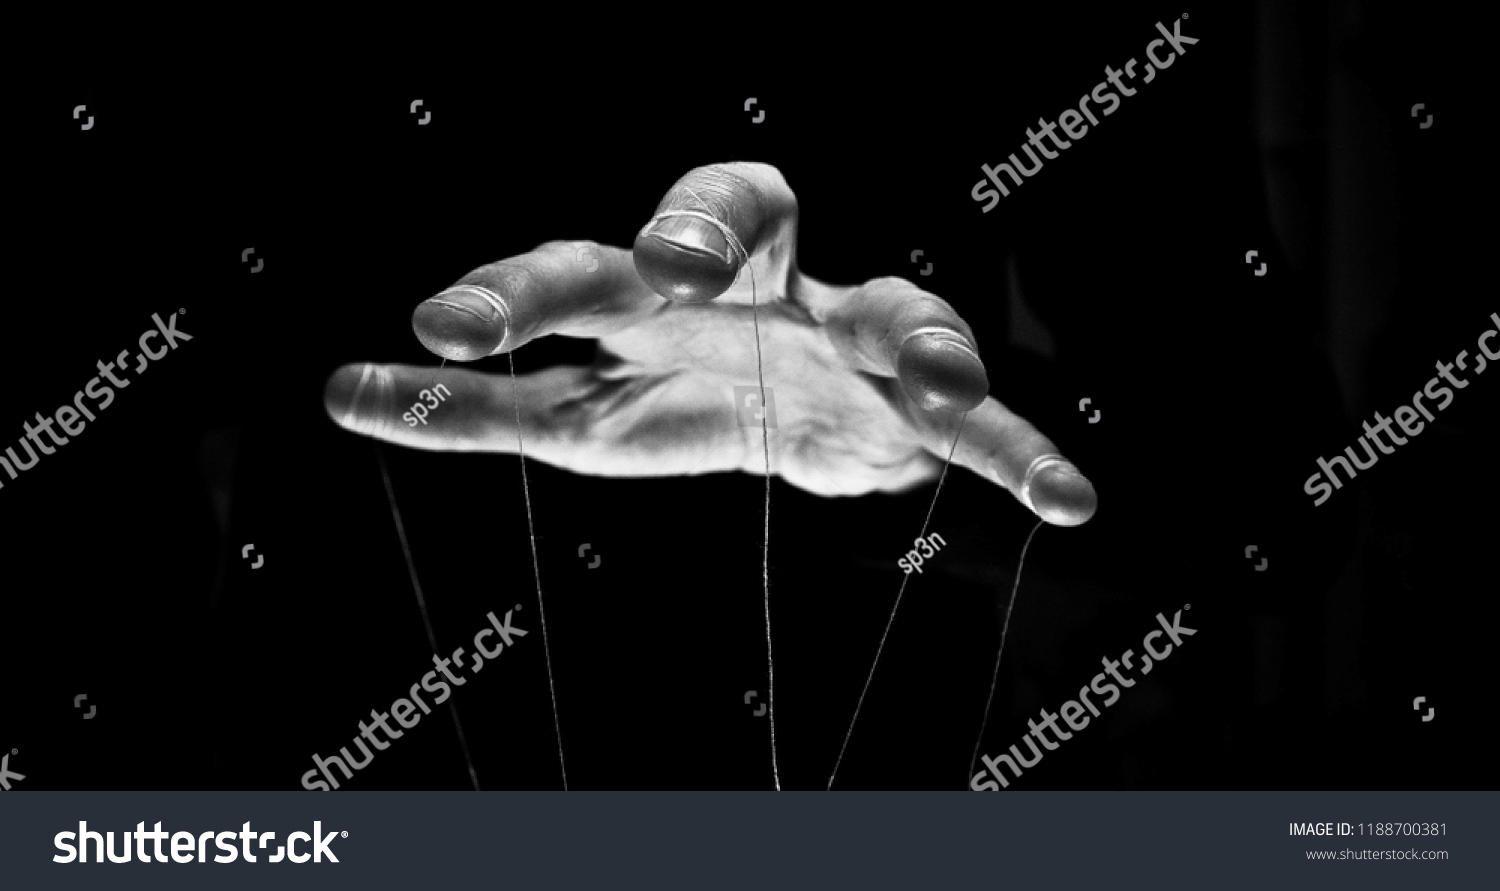 Eerie puppeteer hands controlling you. Manipulation concept #1188700381